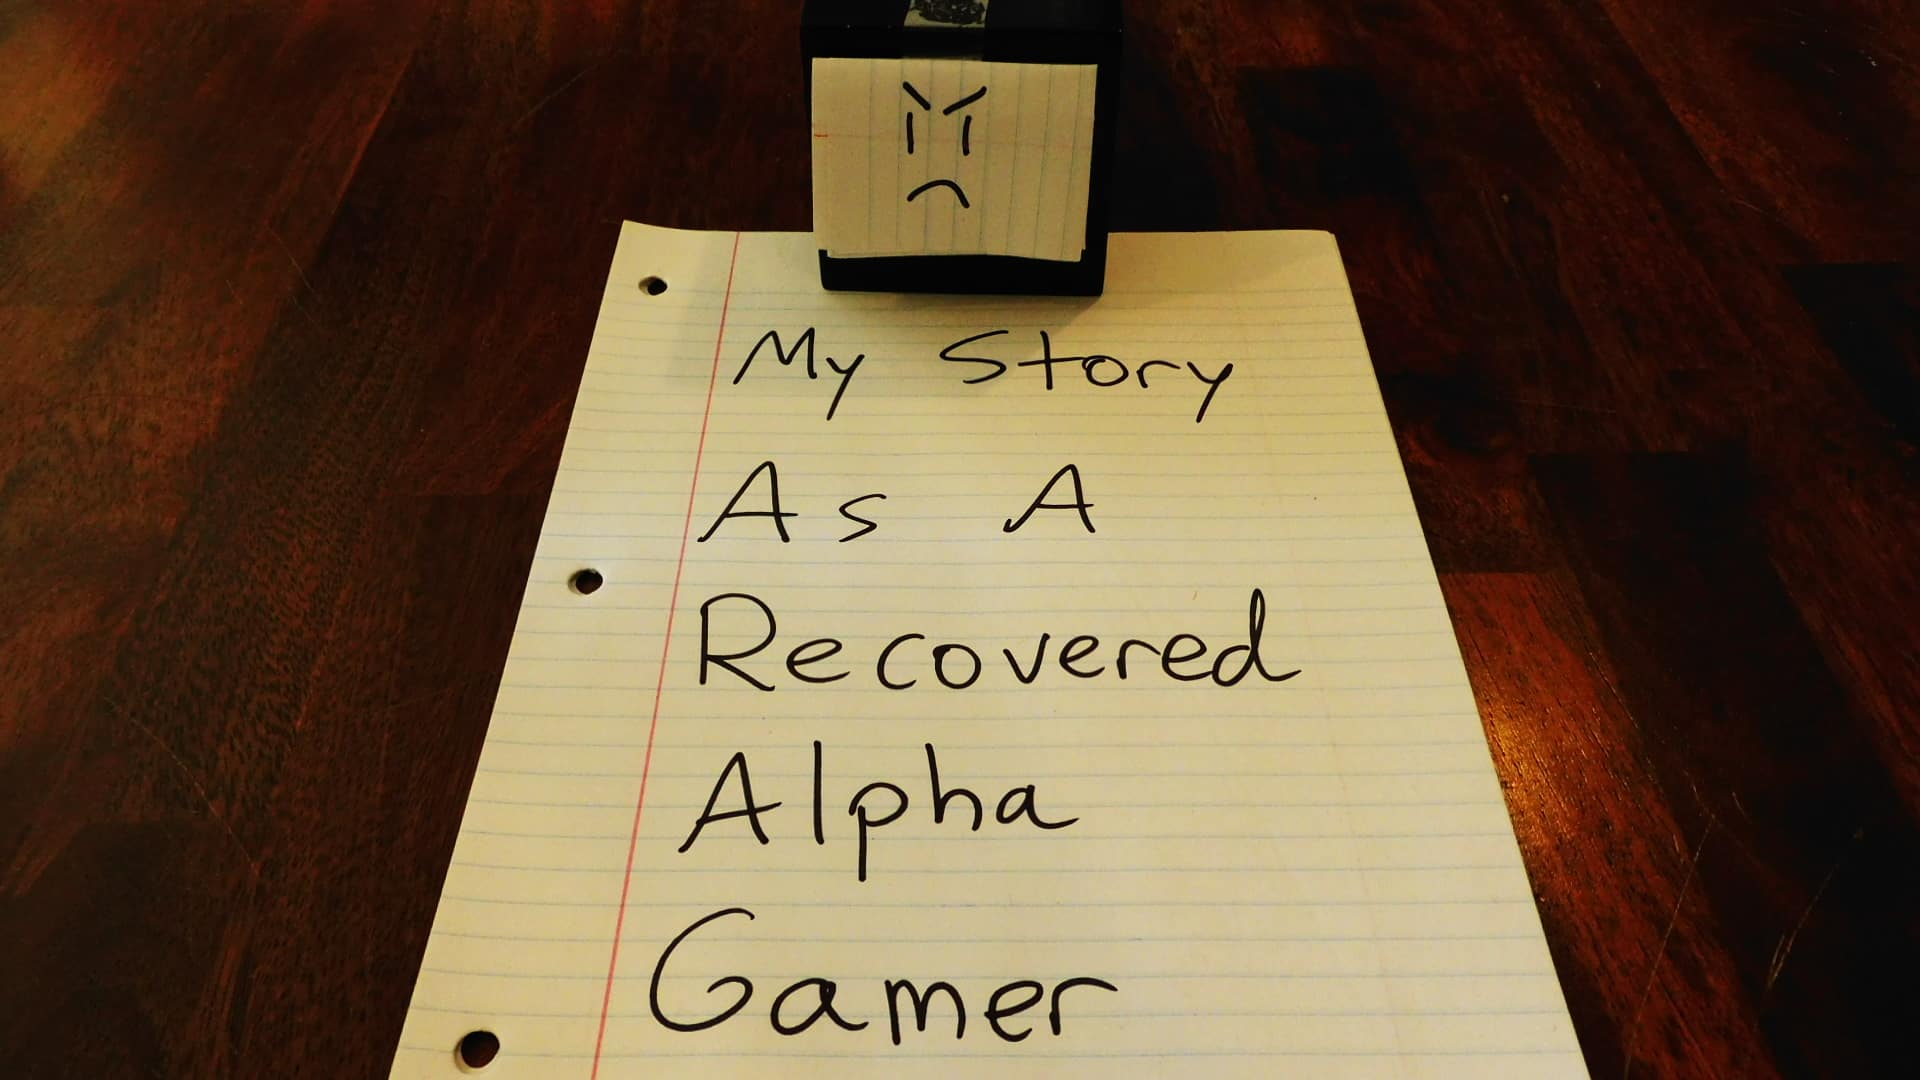 My Story As A Recovered Alpha Gamer